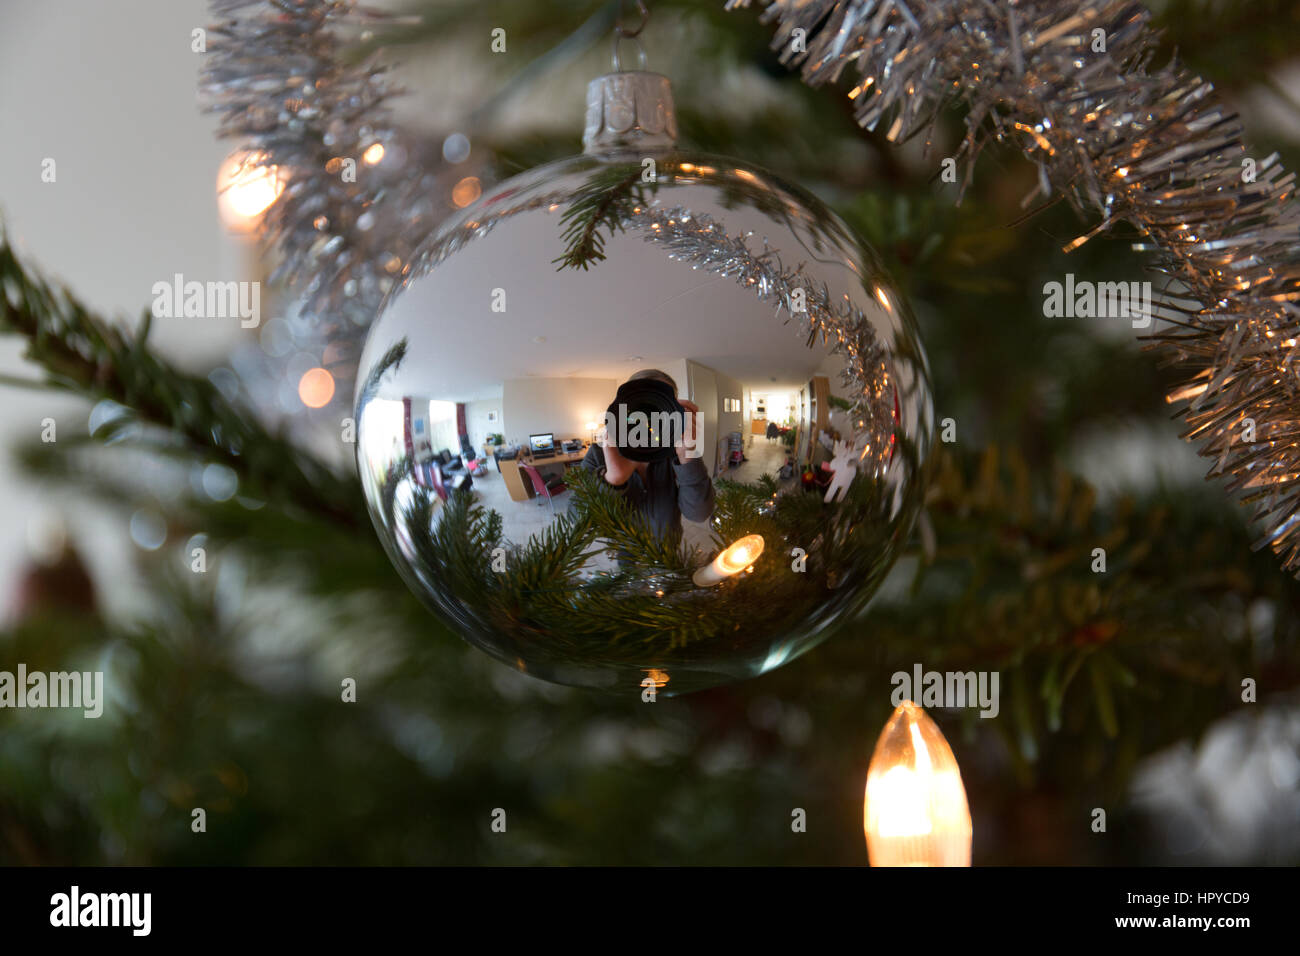 Reflection of the photographer in a shiny silver Christmas ball Stock Photo